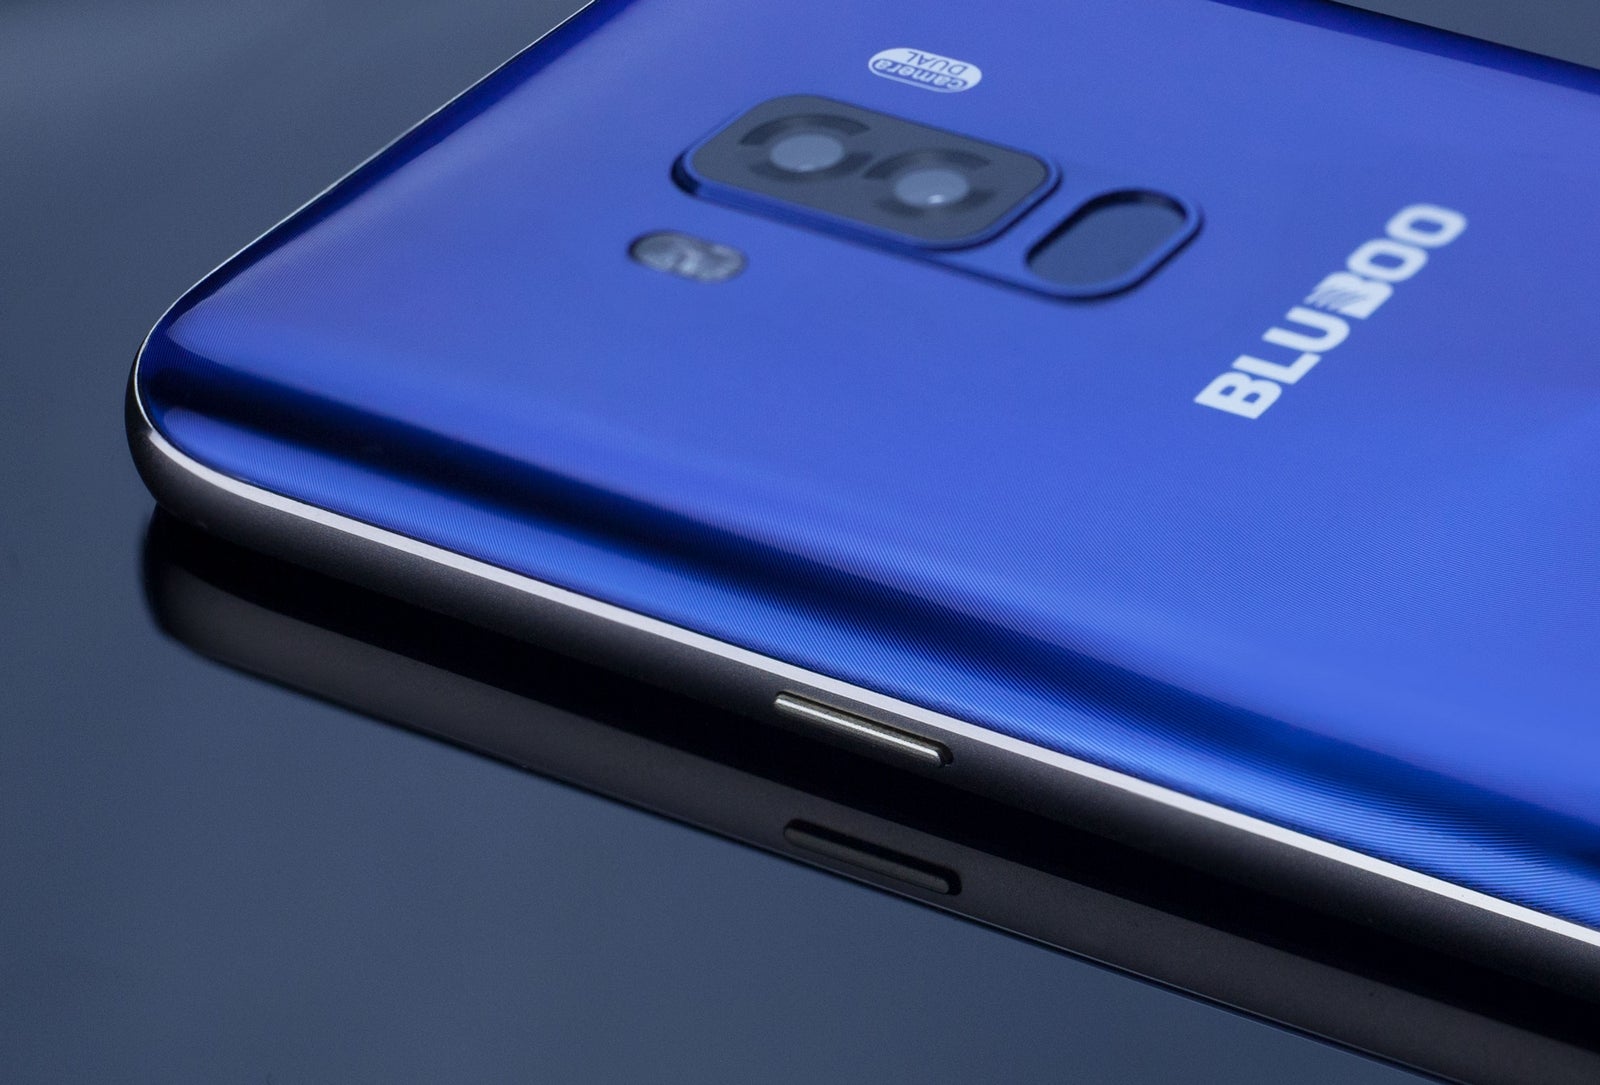 Curvy glass, dual cameras, and huge battery for cheap: the Bluboo S8's pre-sale boosted by more bonuses